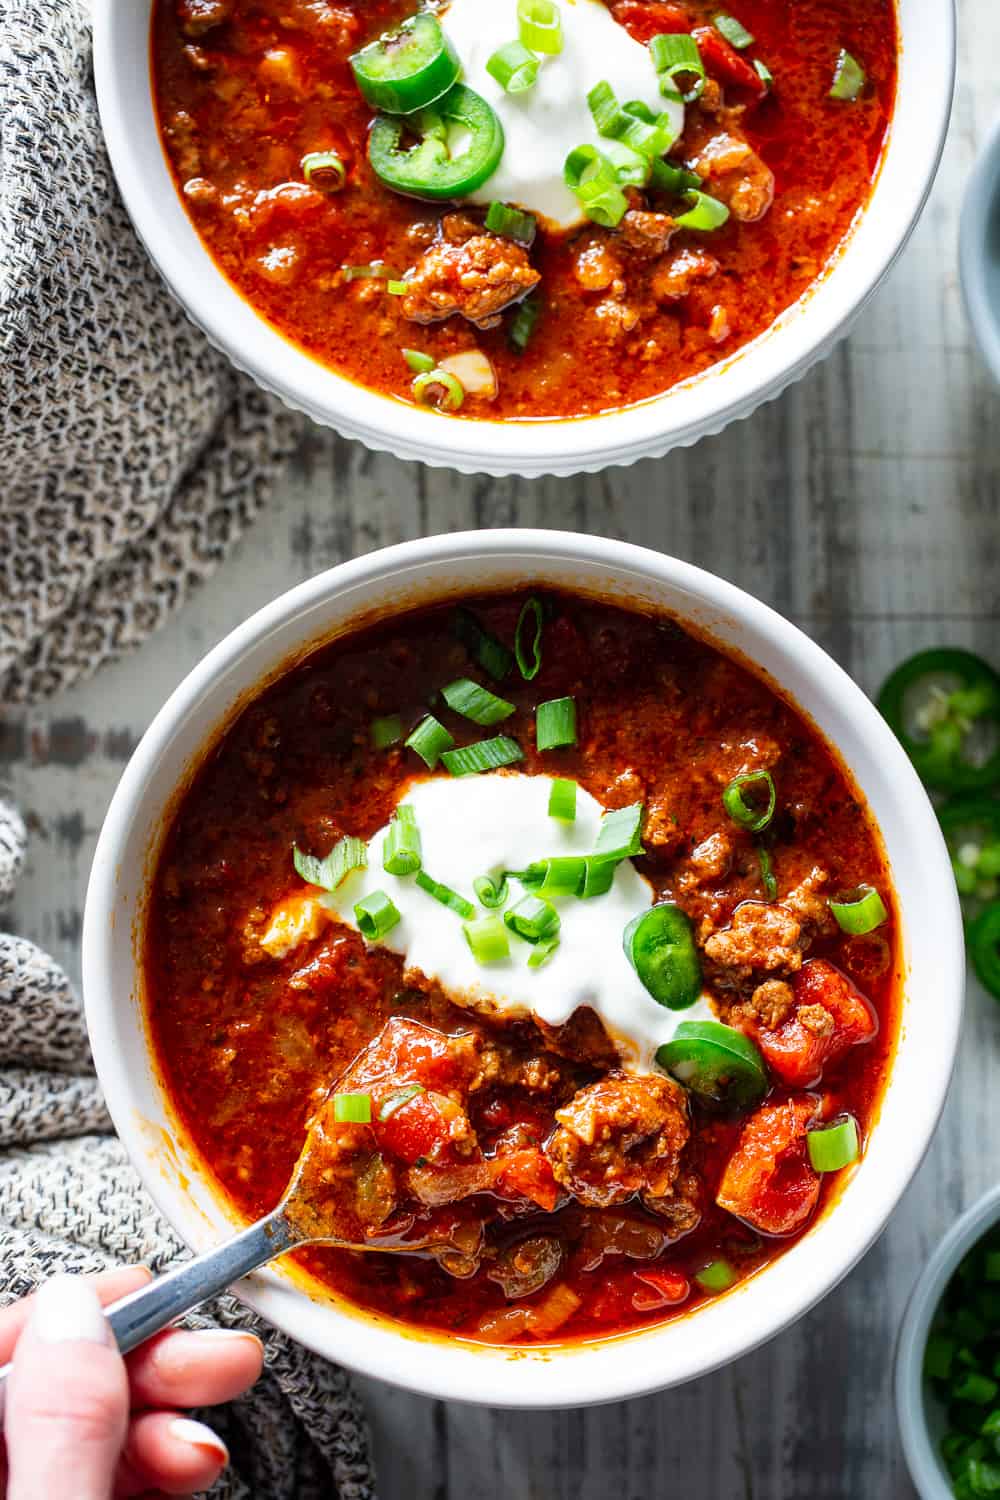 A fast stovetop beanless chili that’s packed with flavor and just the right amount of spice.  This hearty chili is great for weeknights served on it’s own or with cauliflower rice for a healthy meal that’s paleo and Whole30 compliant.  #paleo #whole30 #chili #cleaneating 